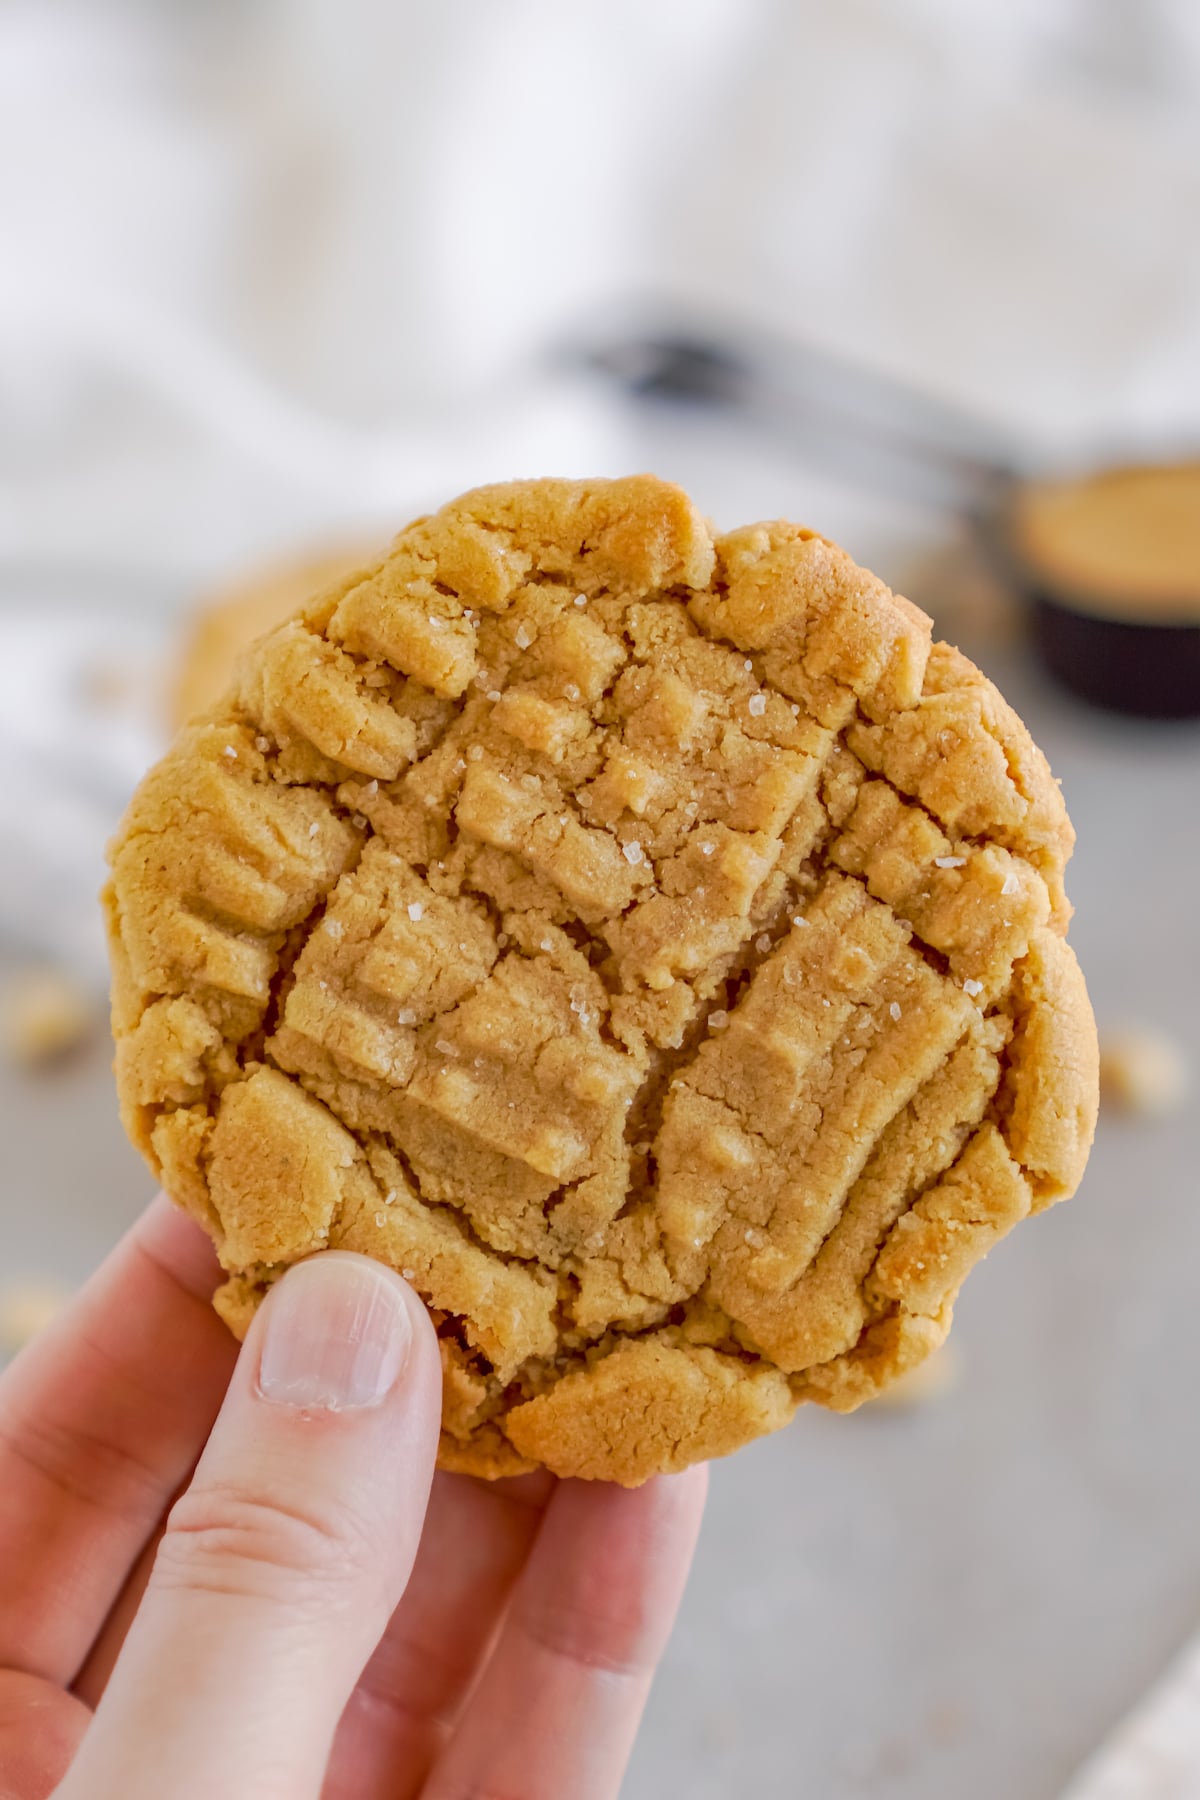 A whole peanut butter cookie is held up.